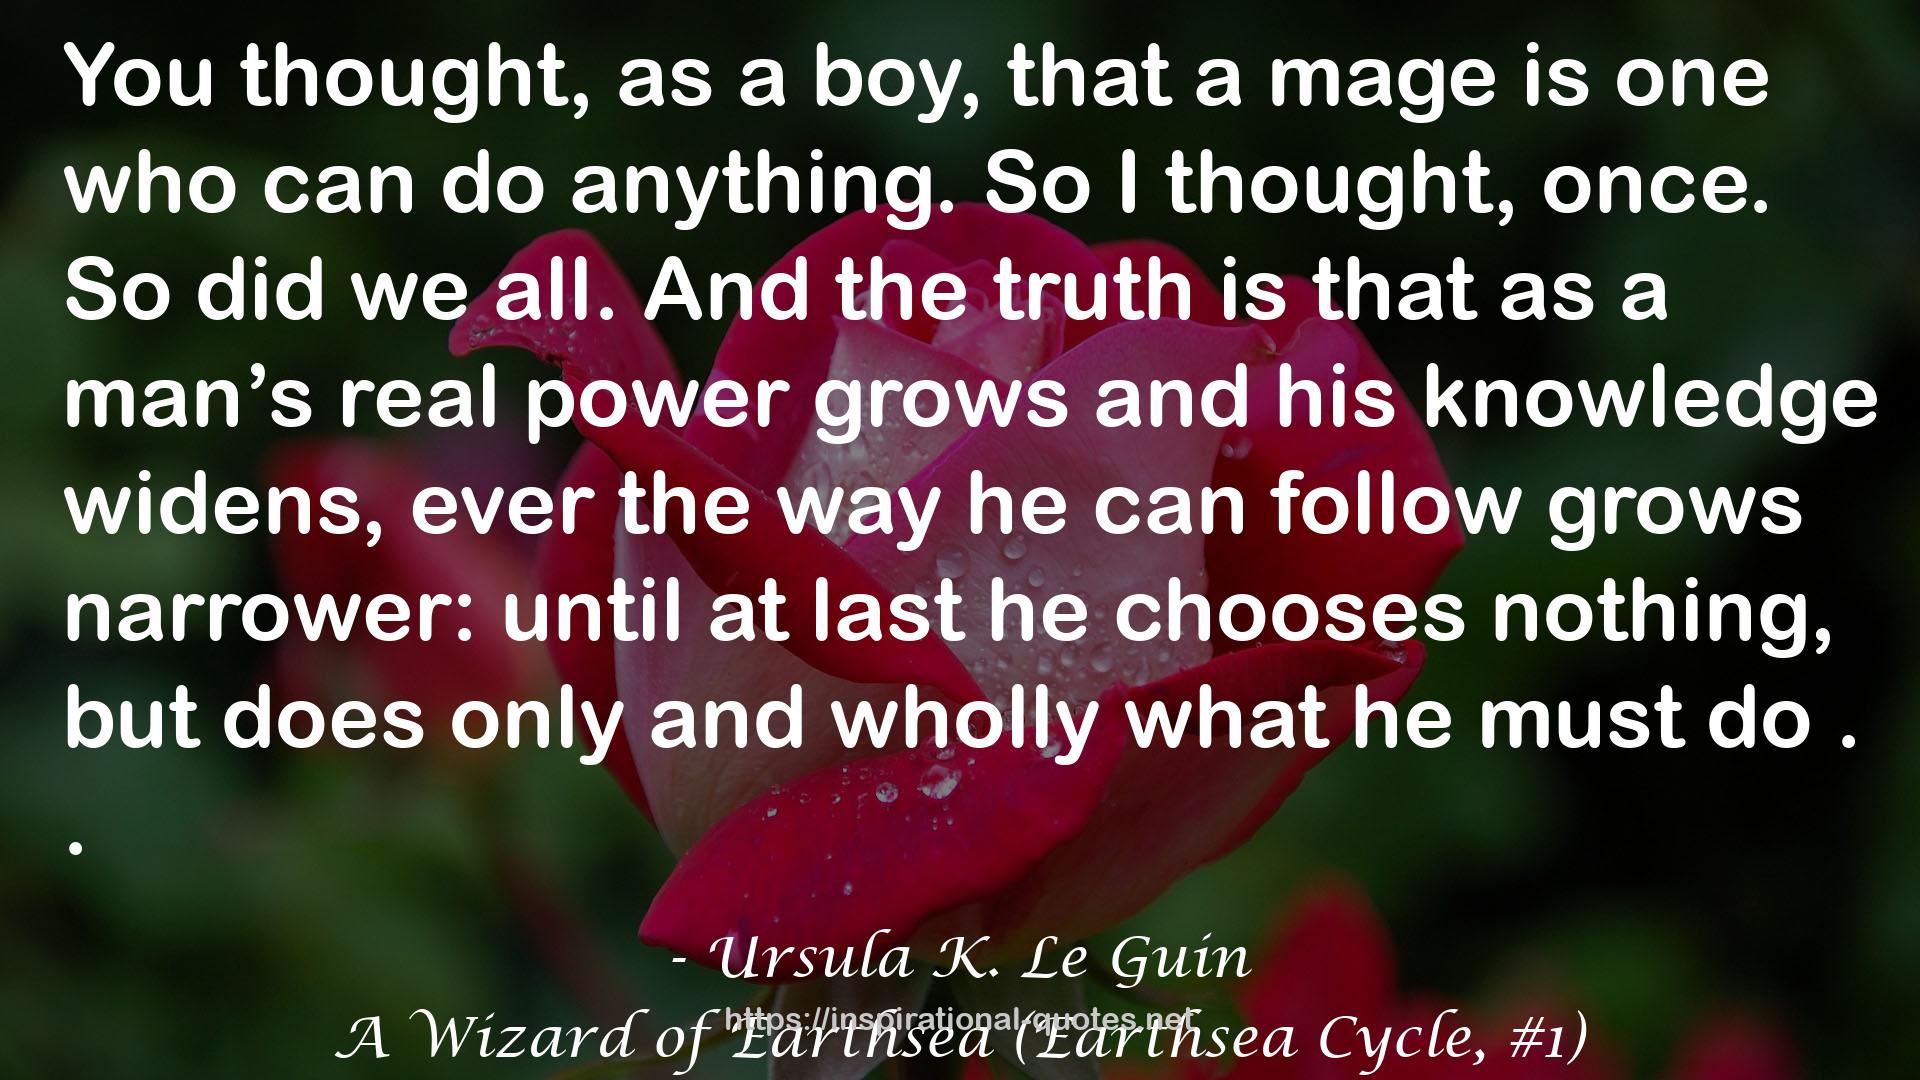 A Wizard of Earthsea (Earthsea Cycle, #1) QUOTES